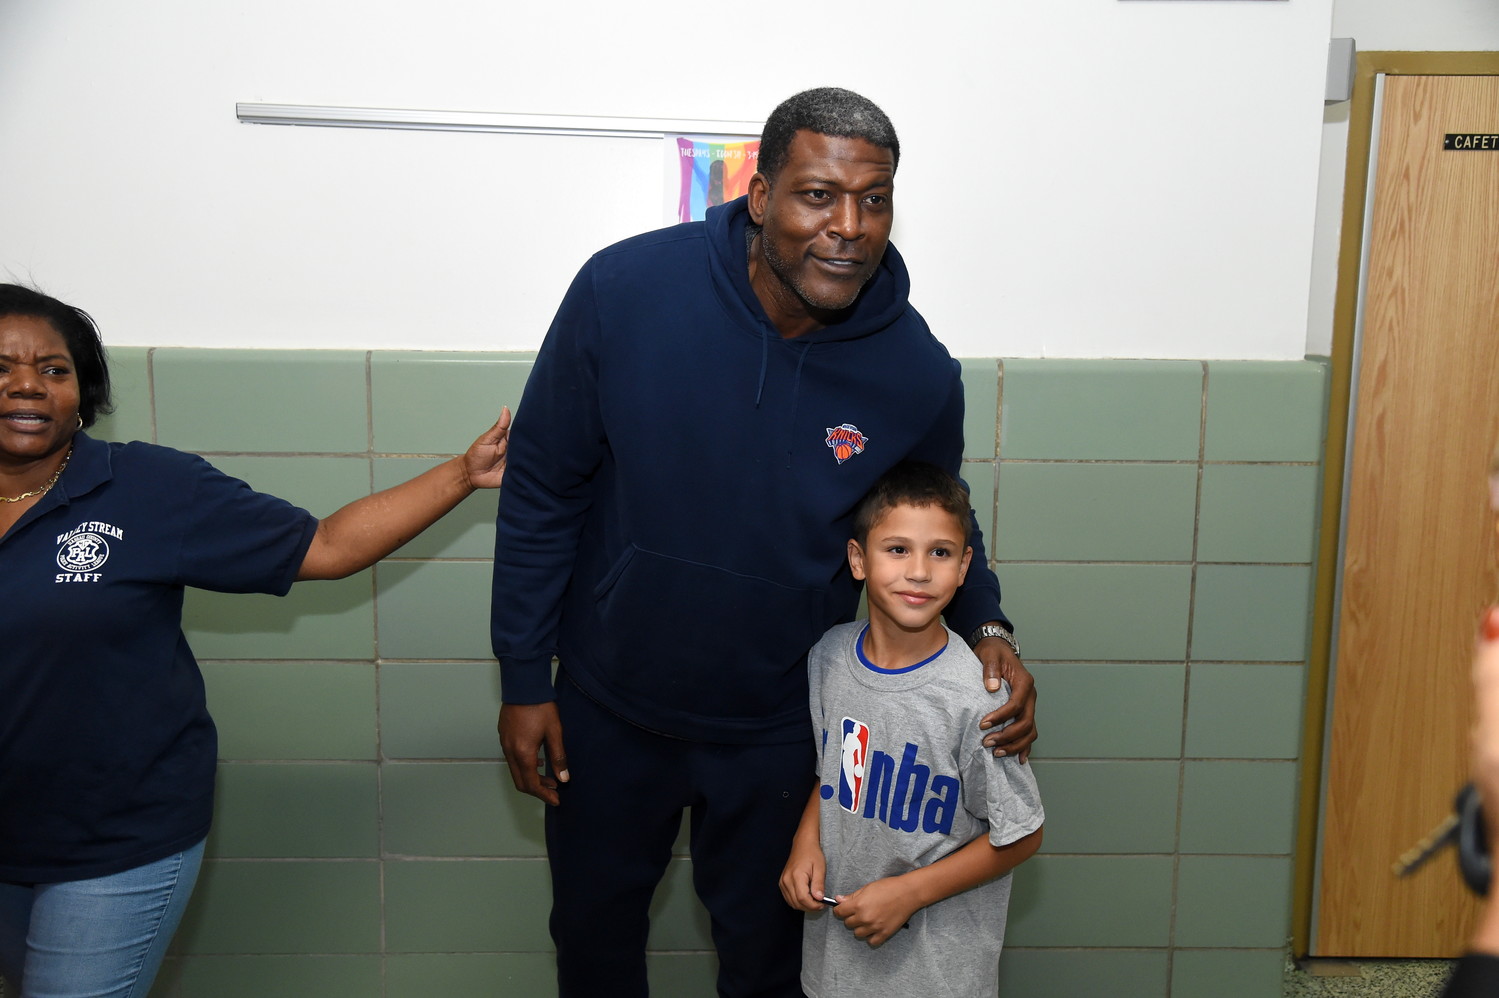 After the basketball clinic was over, kids such as 9-year-old Anthony Cantara lined up to take pictures with Larry Johnson.